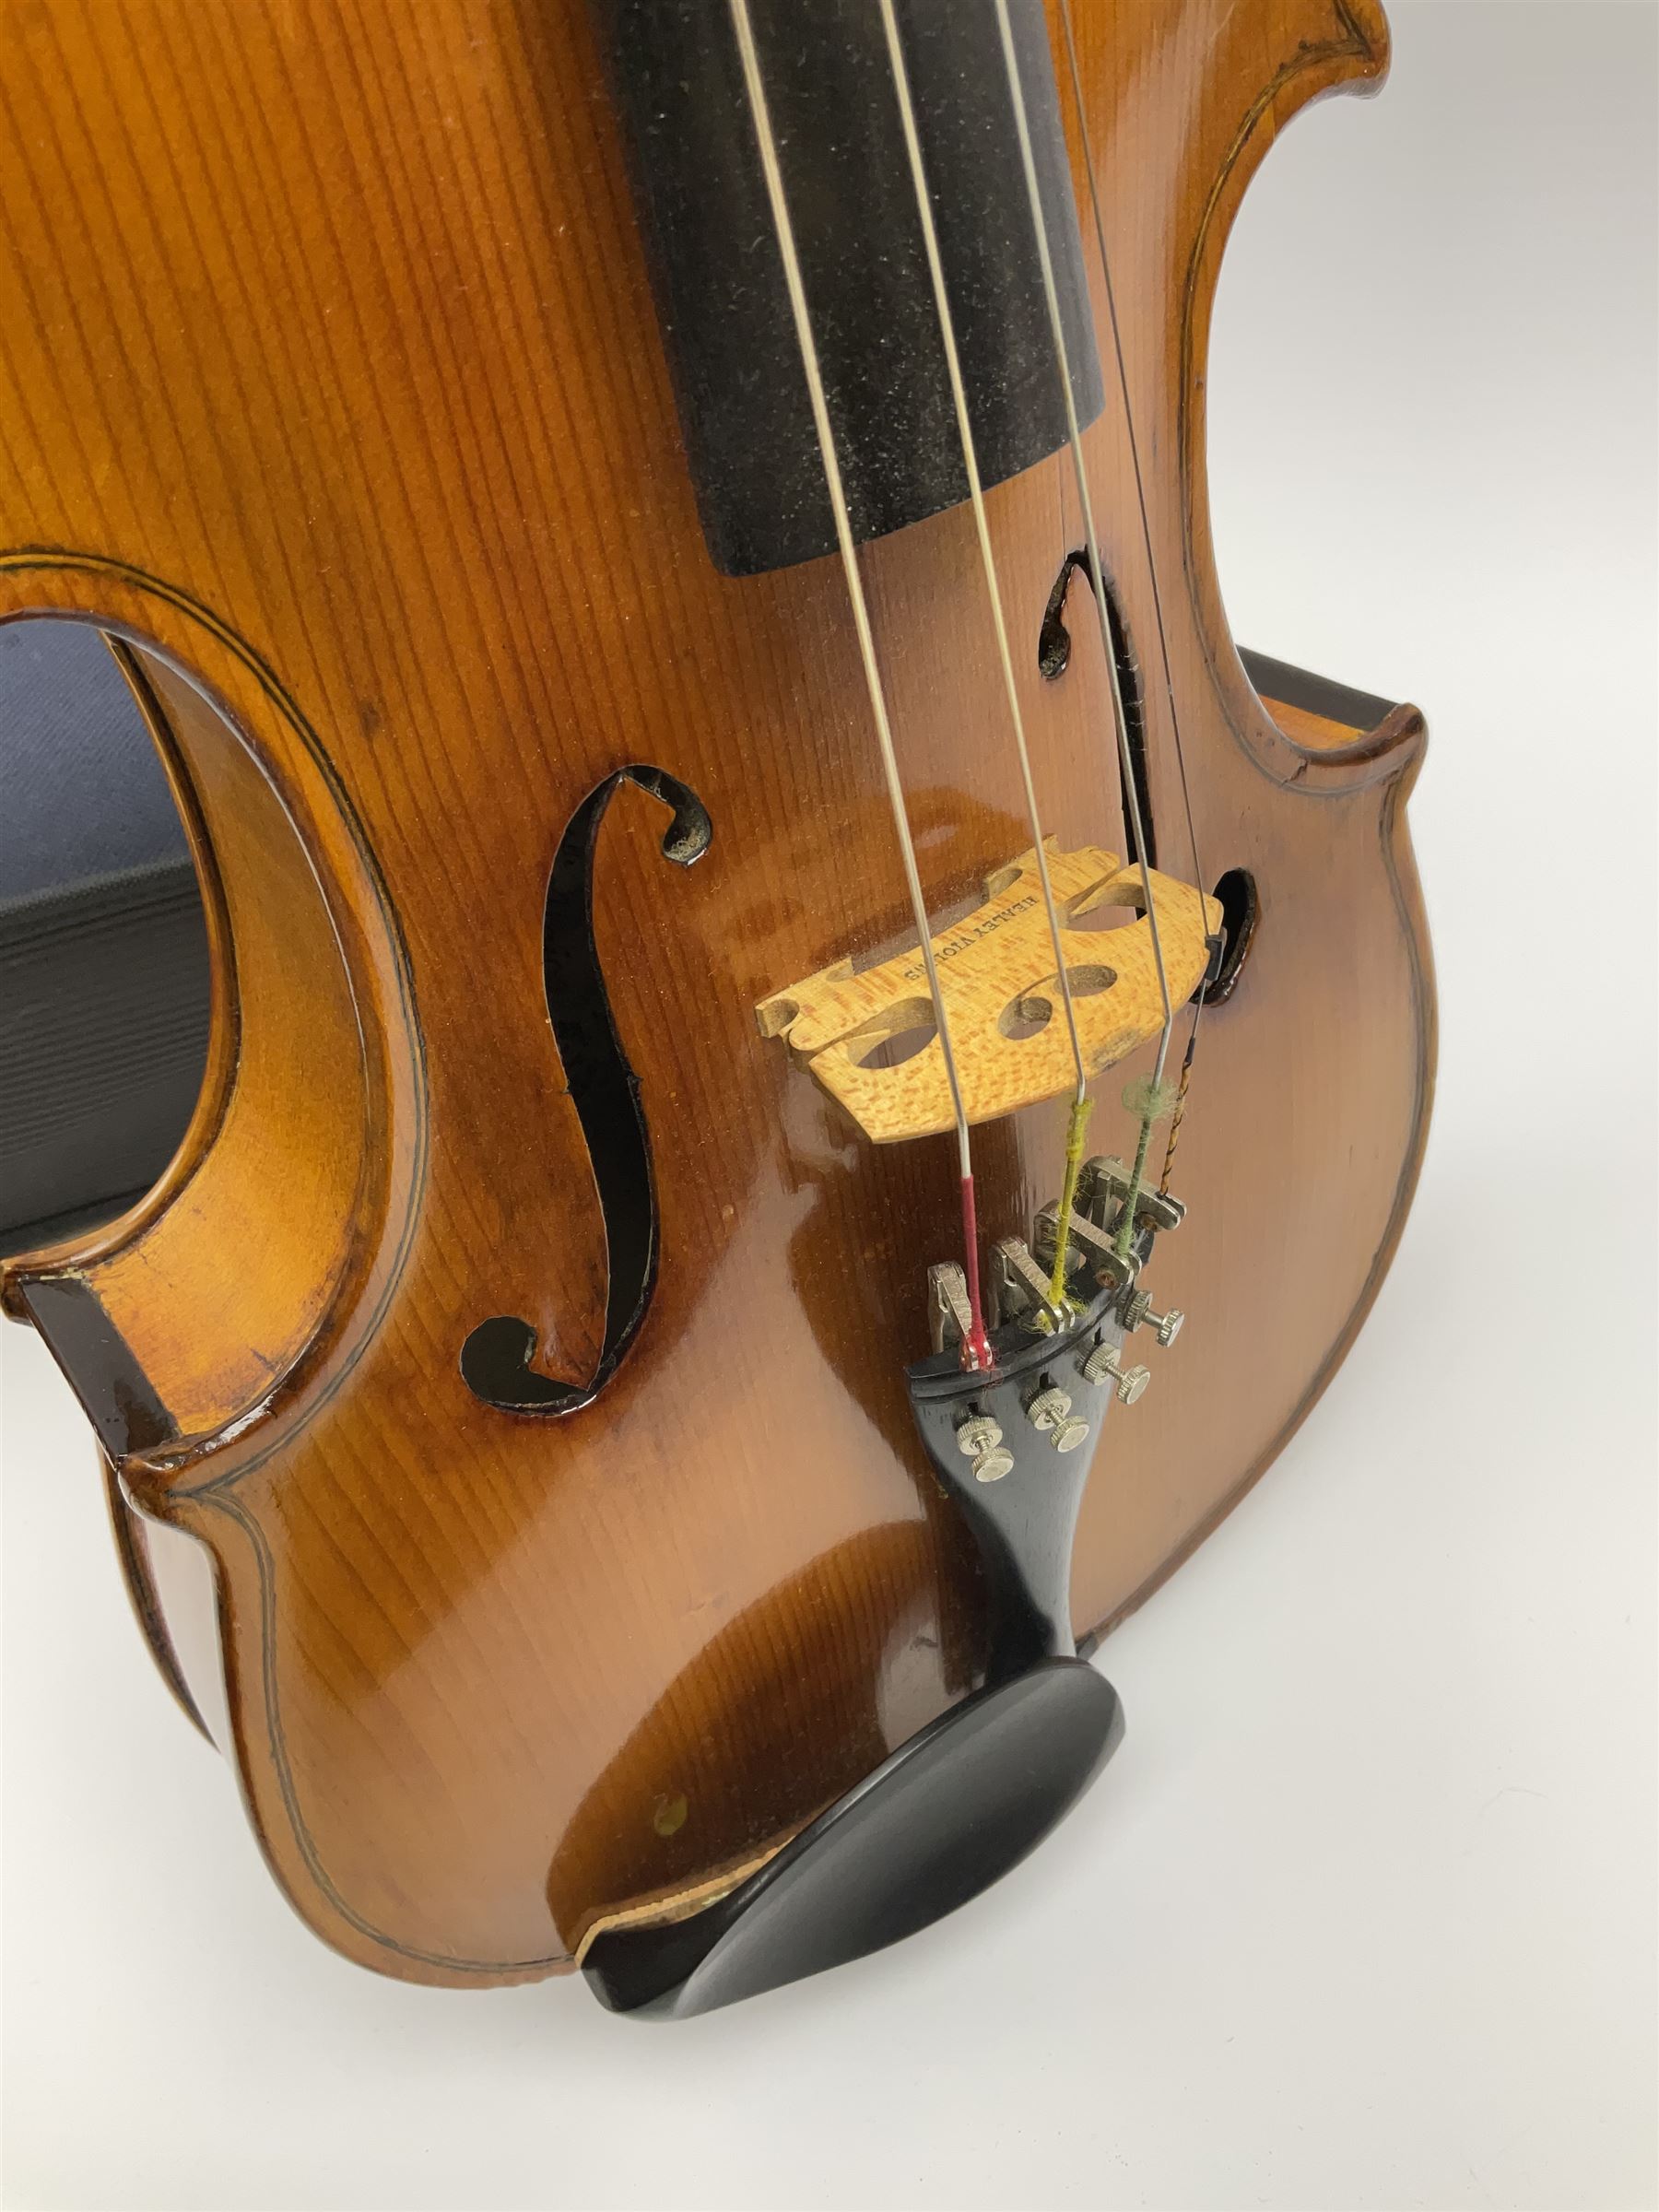 1920s continental large viola with 42cm two-piece maple back and ribs and wide grain sprucewood top - Image 2 of 21